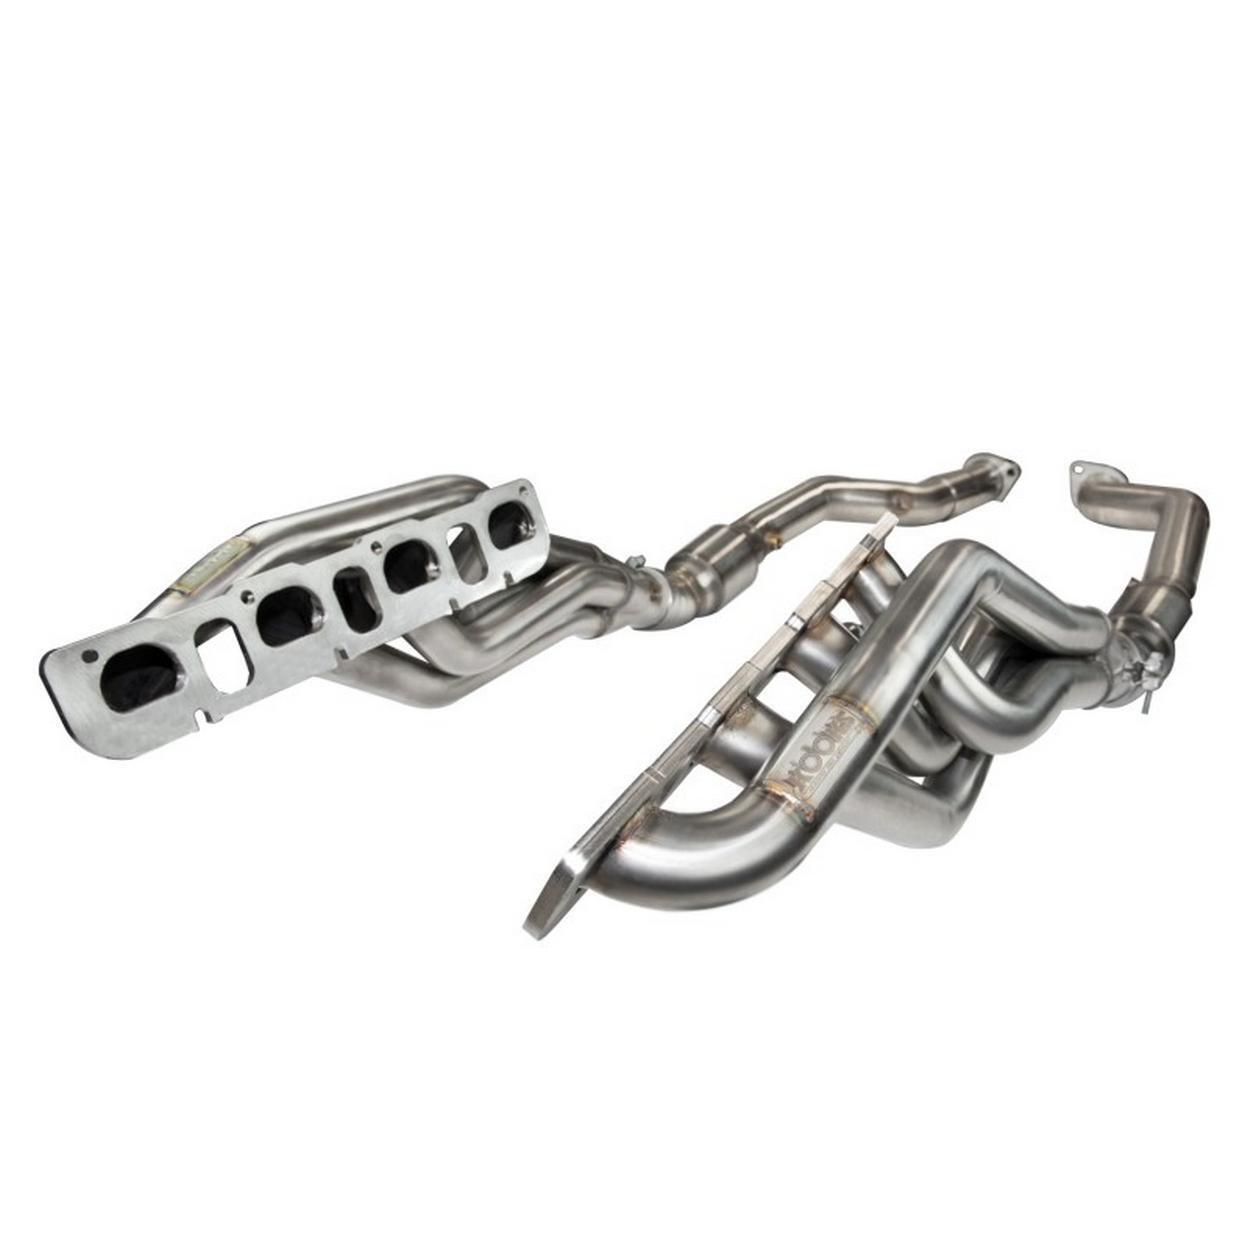 Exhaust Header for 2018-2021 Jeep Grand Cherokee Trackhawk Supercharged 6.2L V8